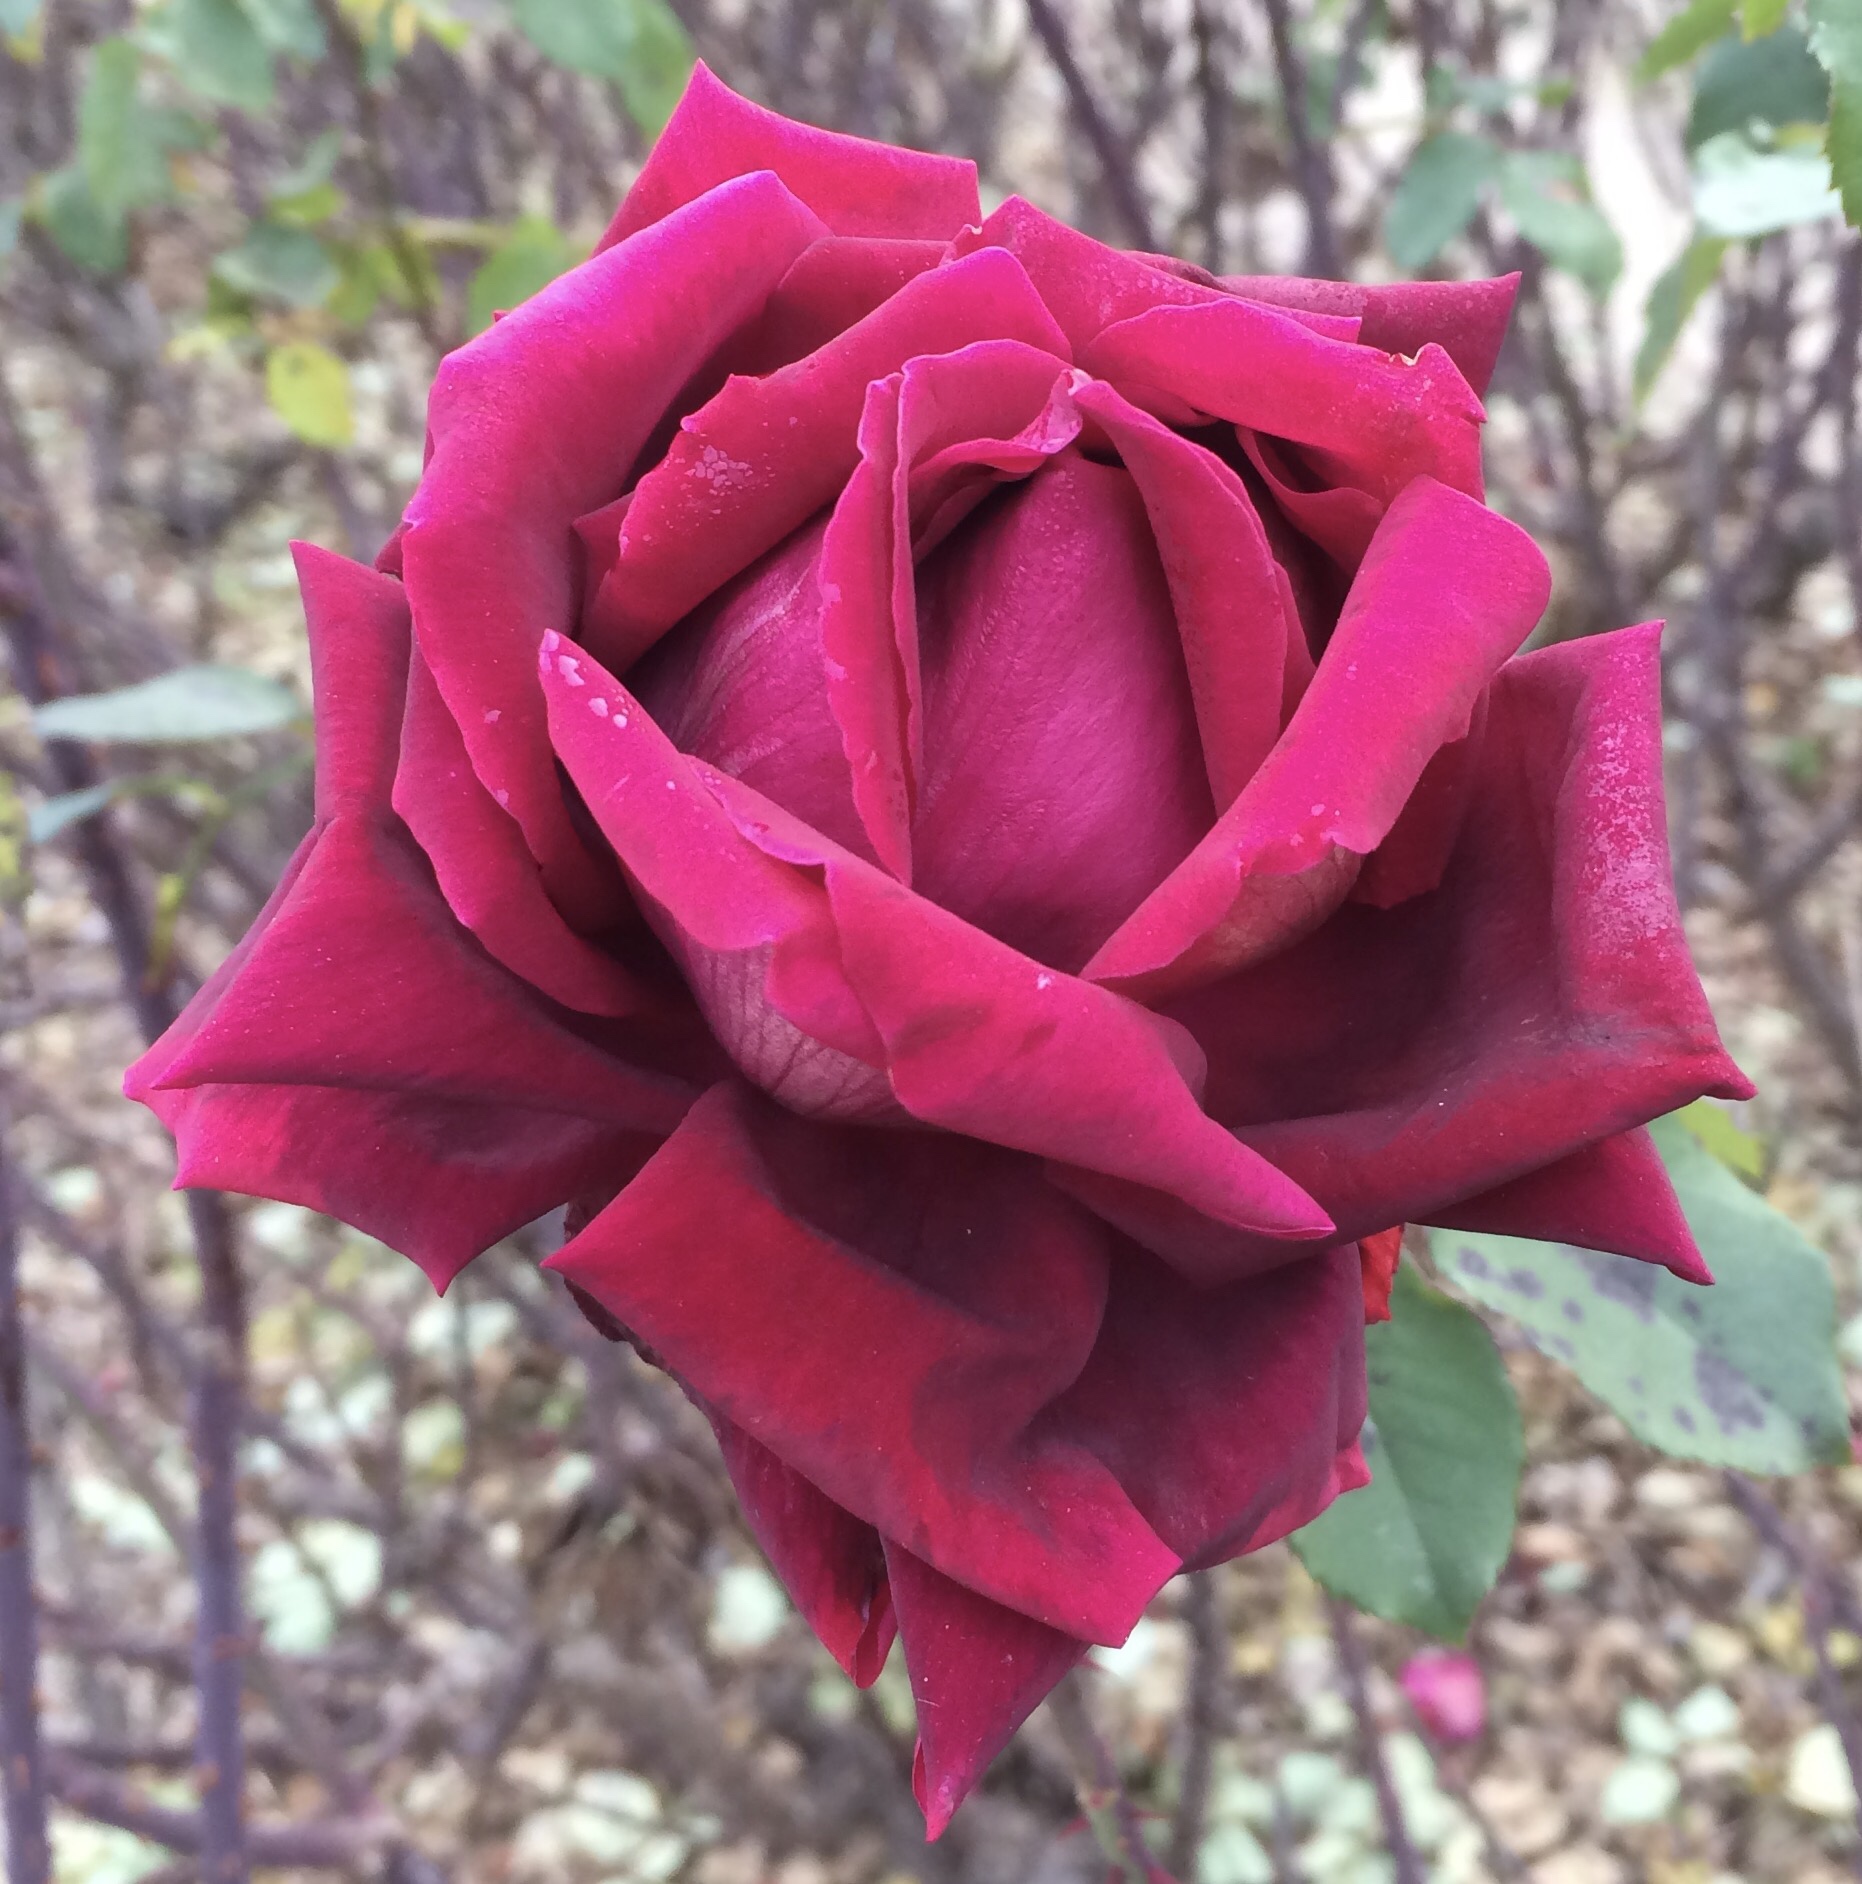 A deep-red rose - one of my favourite rose colours